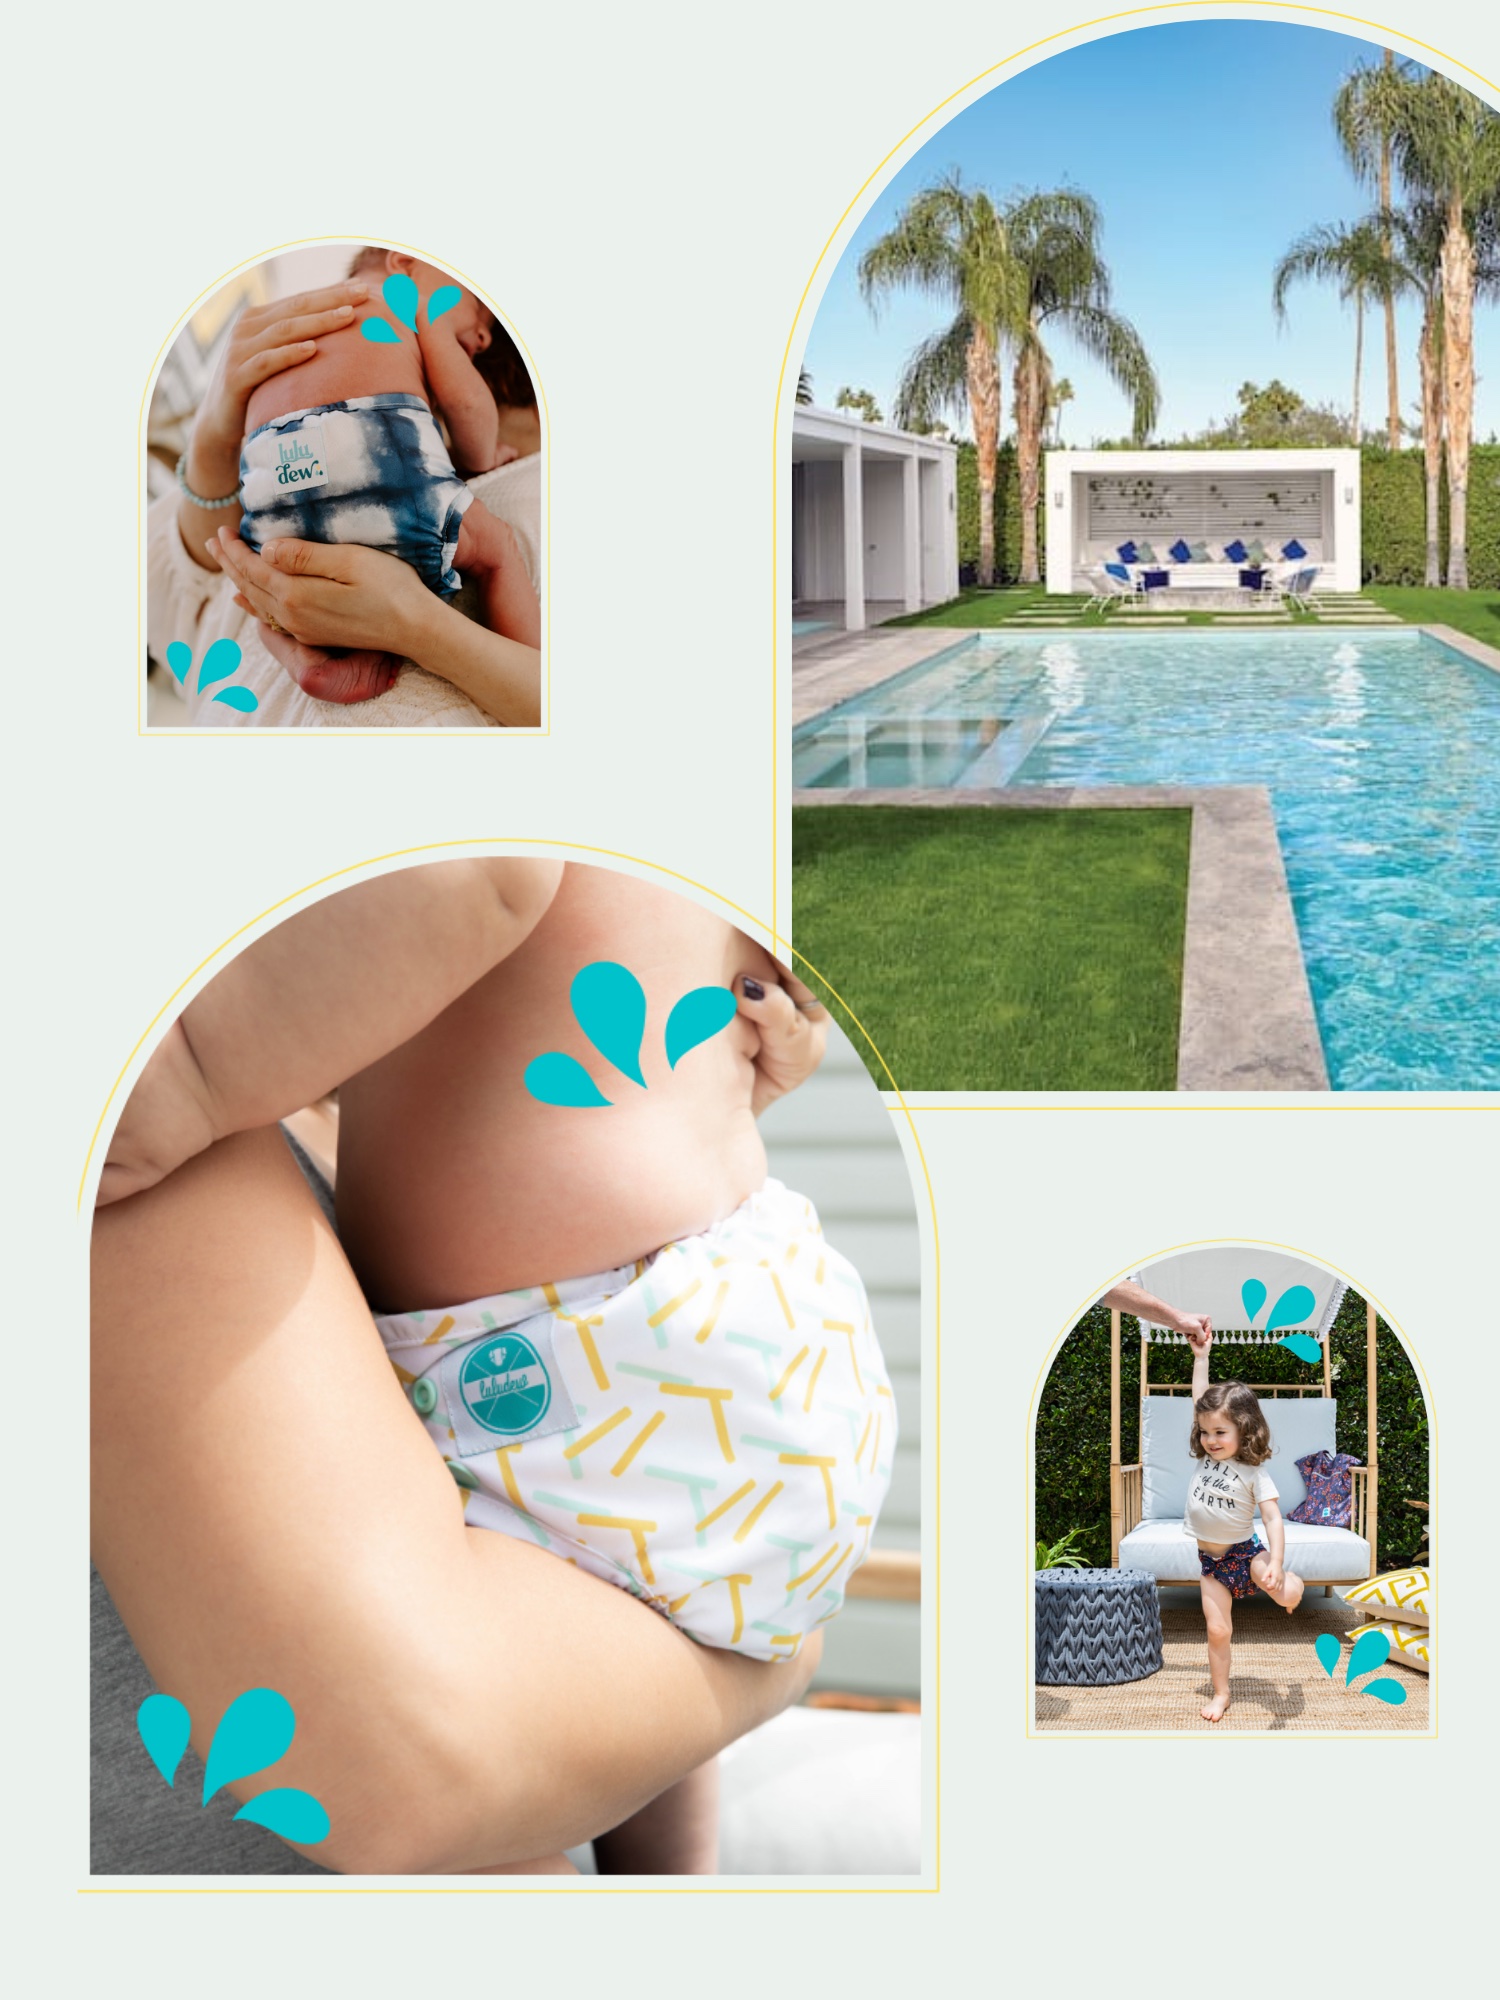 Images of babies being held in Luludew diapers with little girl and pool